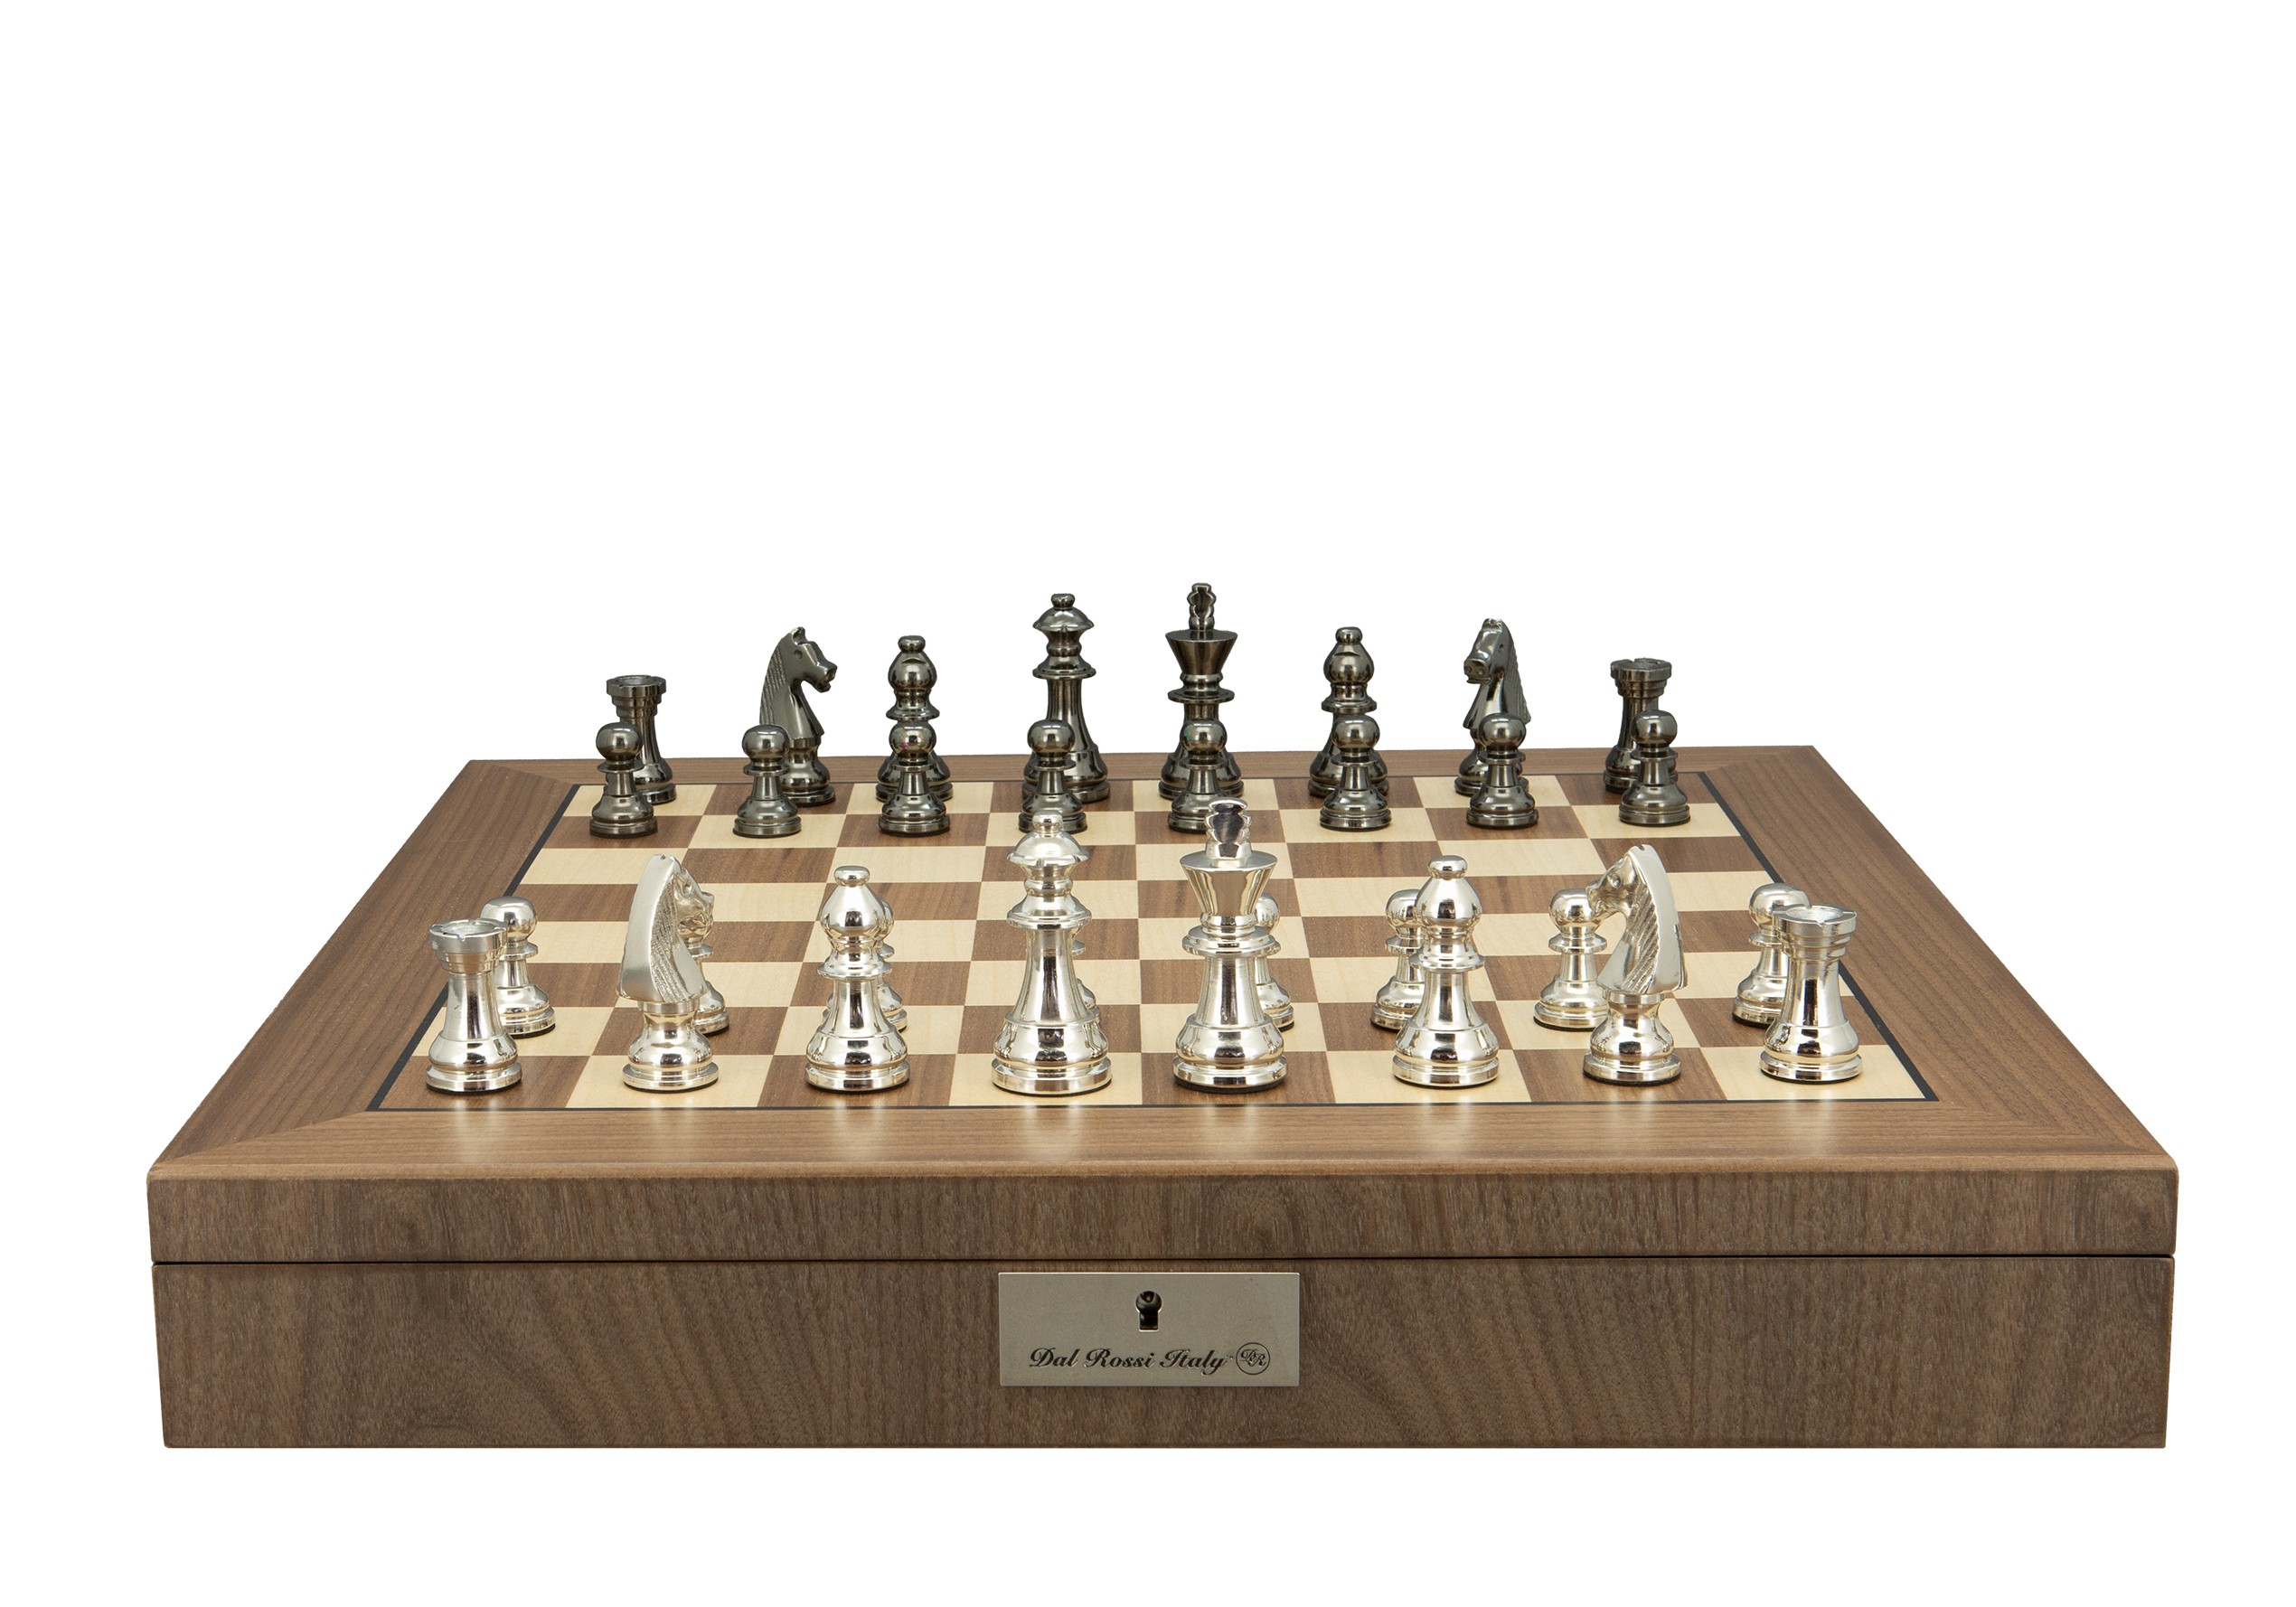 Dal Rossi Italy, Staunton Black Nickel & Silver 80mm Chessmen on a Walnut Inlaid Chess Box with Compartments 20"